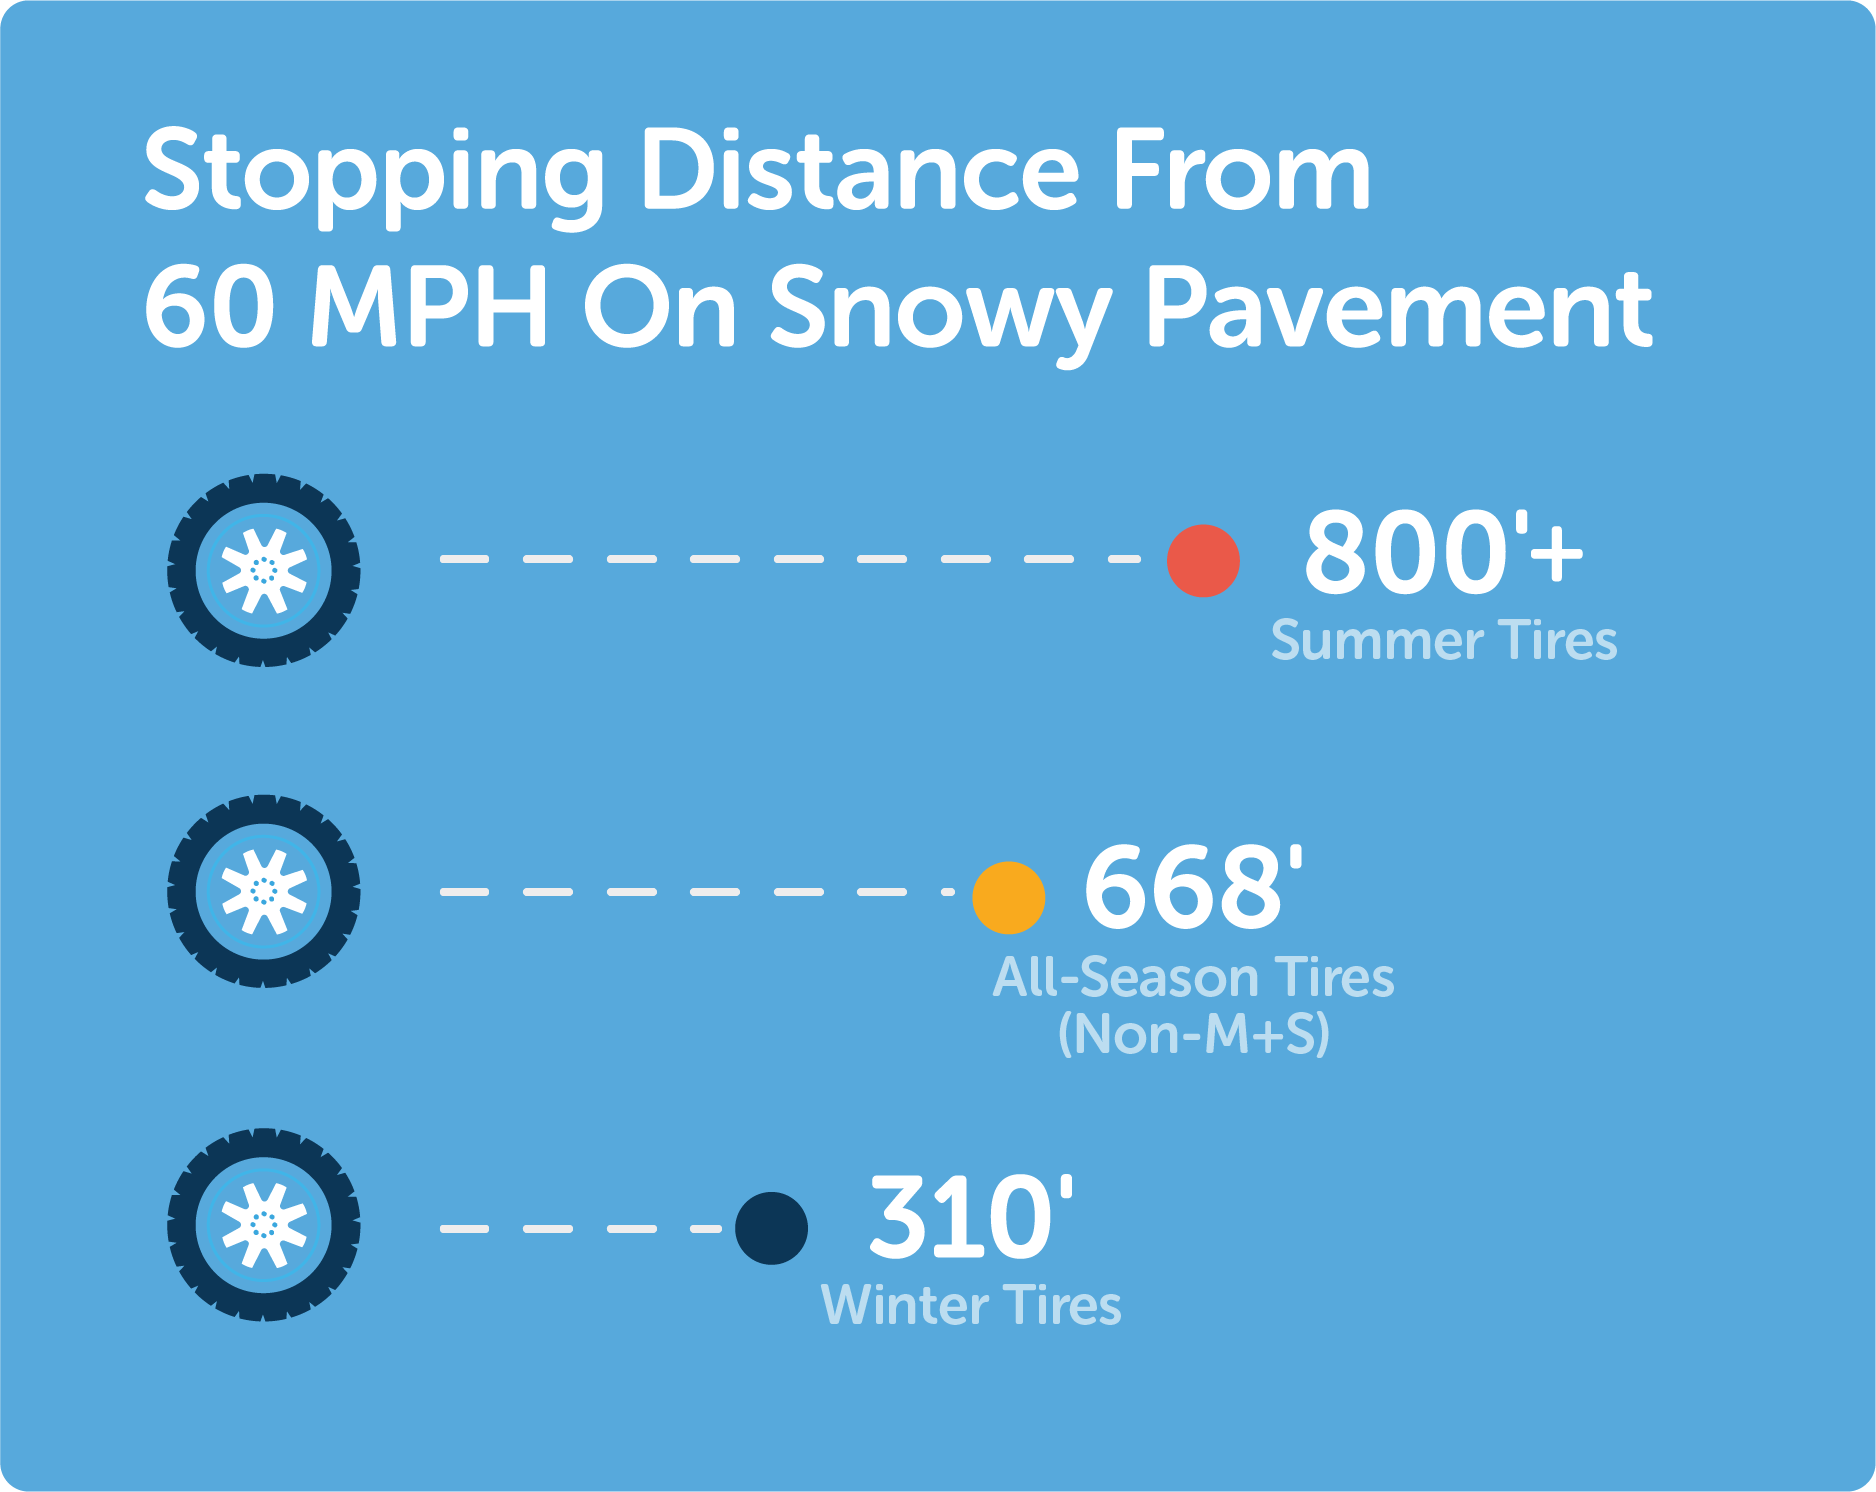 Stopping Distance From 60 MPH On Snowy Pavement Graphic detail image